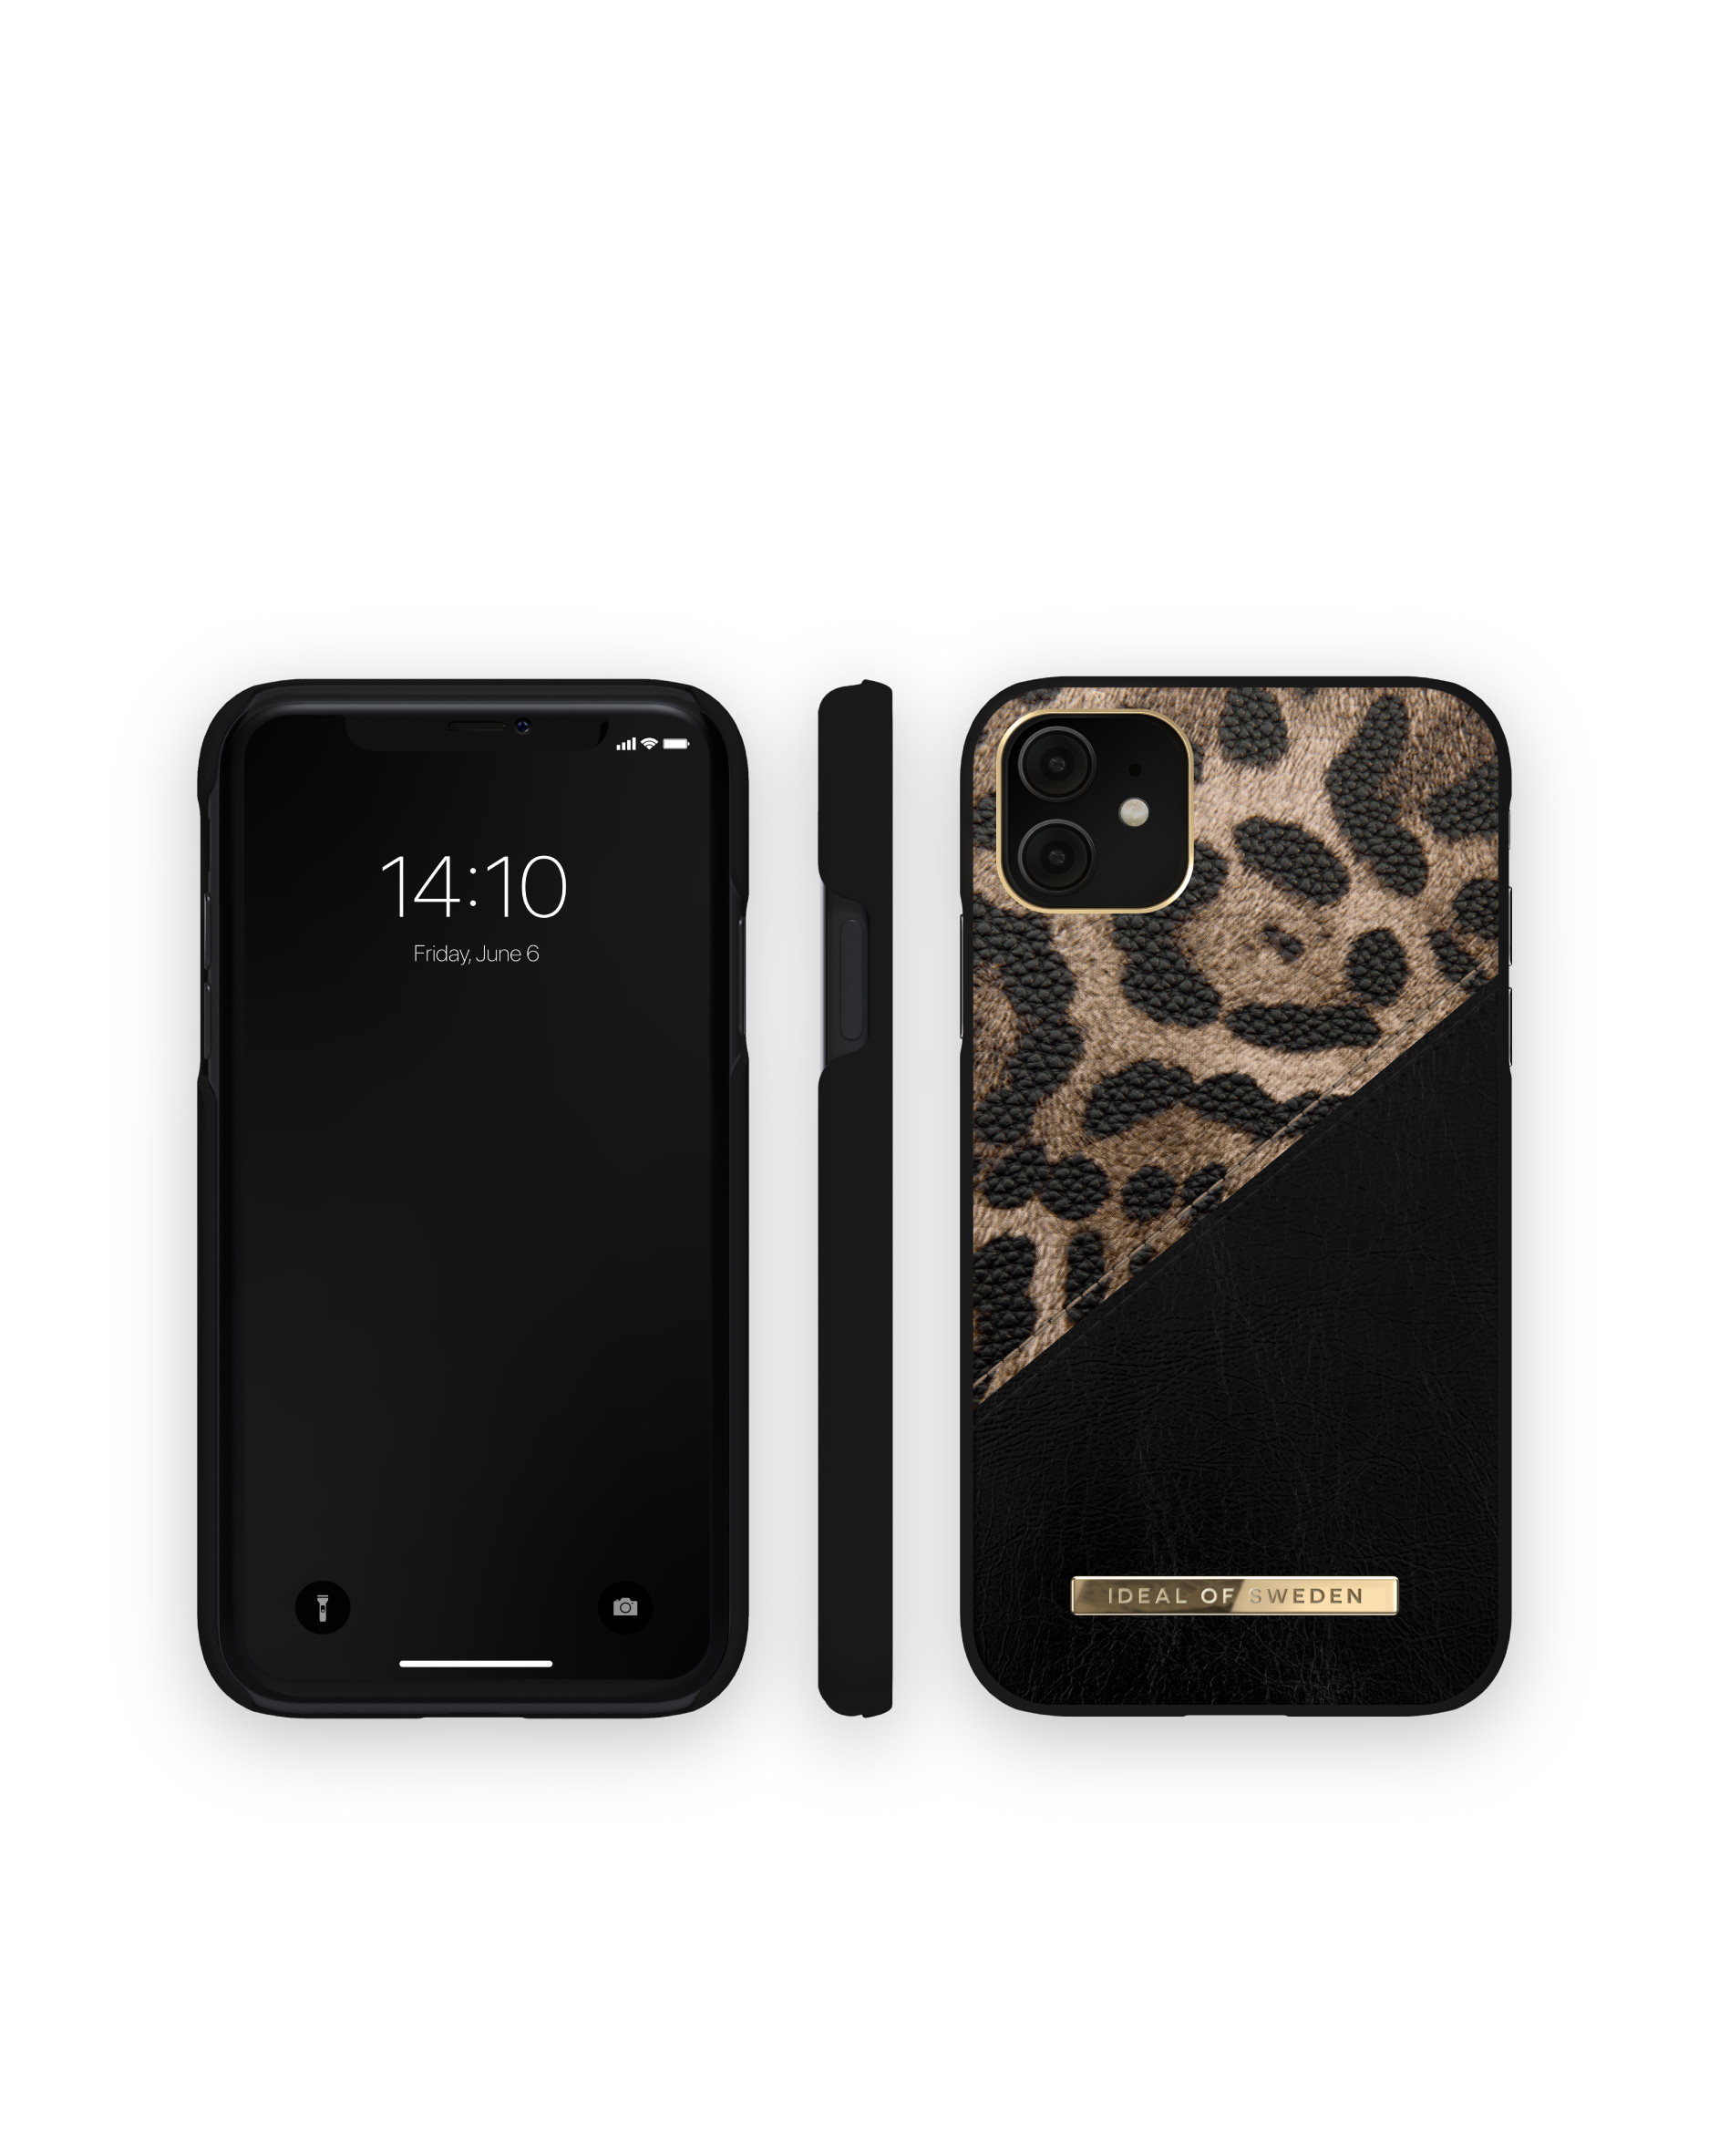 IDEAL OF SWEDEN IDACAW21-I1961-330, Backcover, 11/XR, Leopard Midnight Apple, iPhone